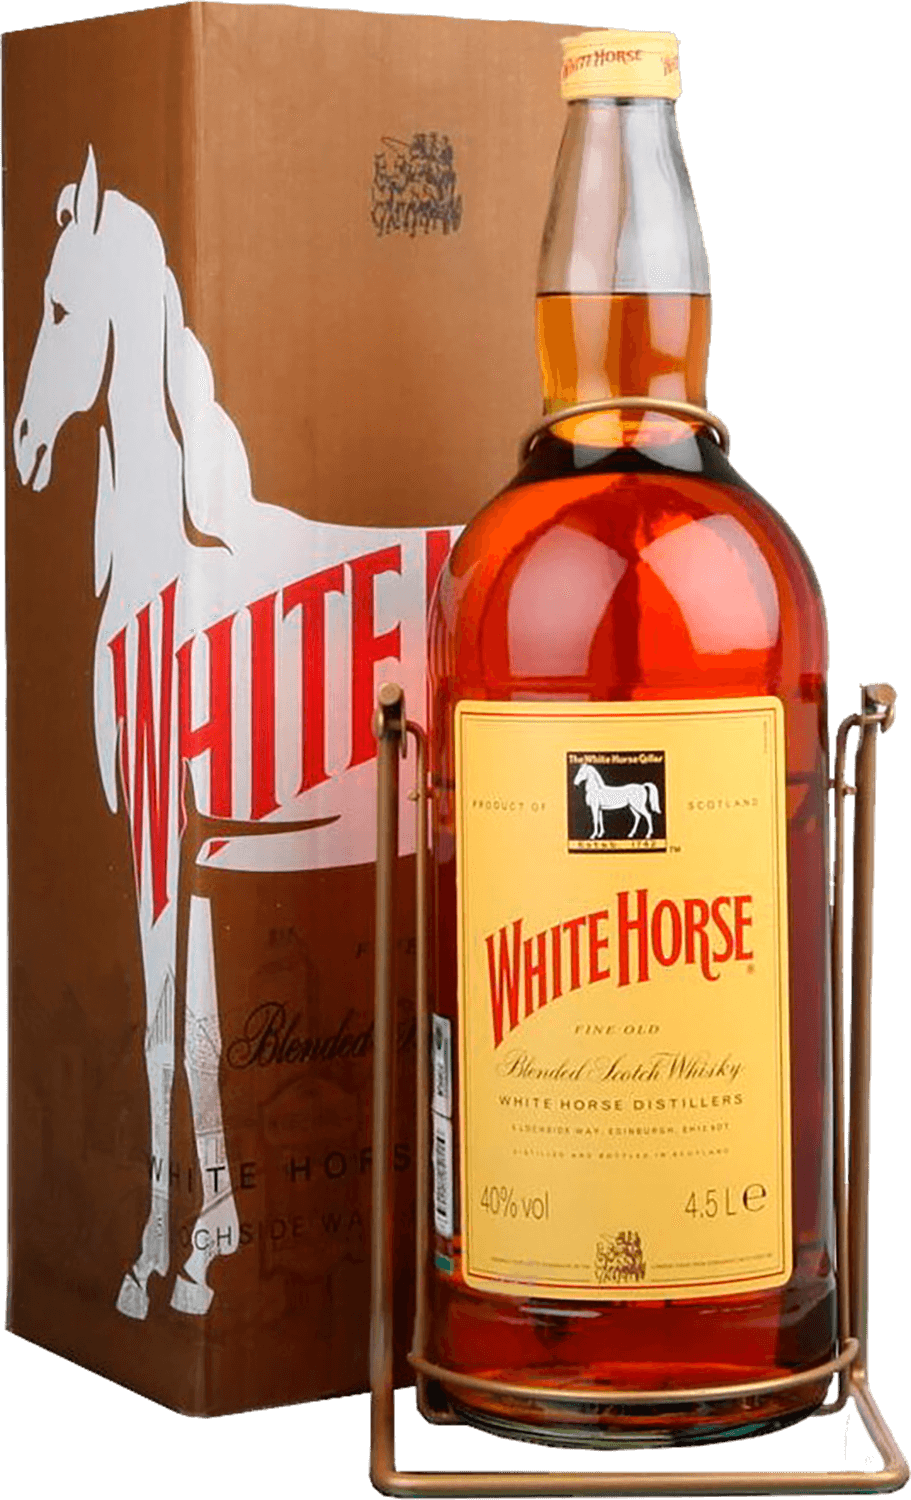 White Horse Blended Scotch Whisky (gift box) angus dundee cask strength blended grain scotch whisky 50 y o gift box